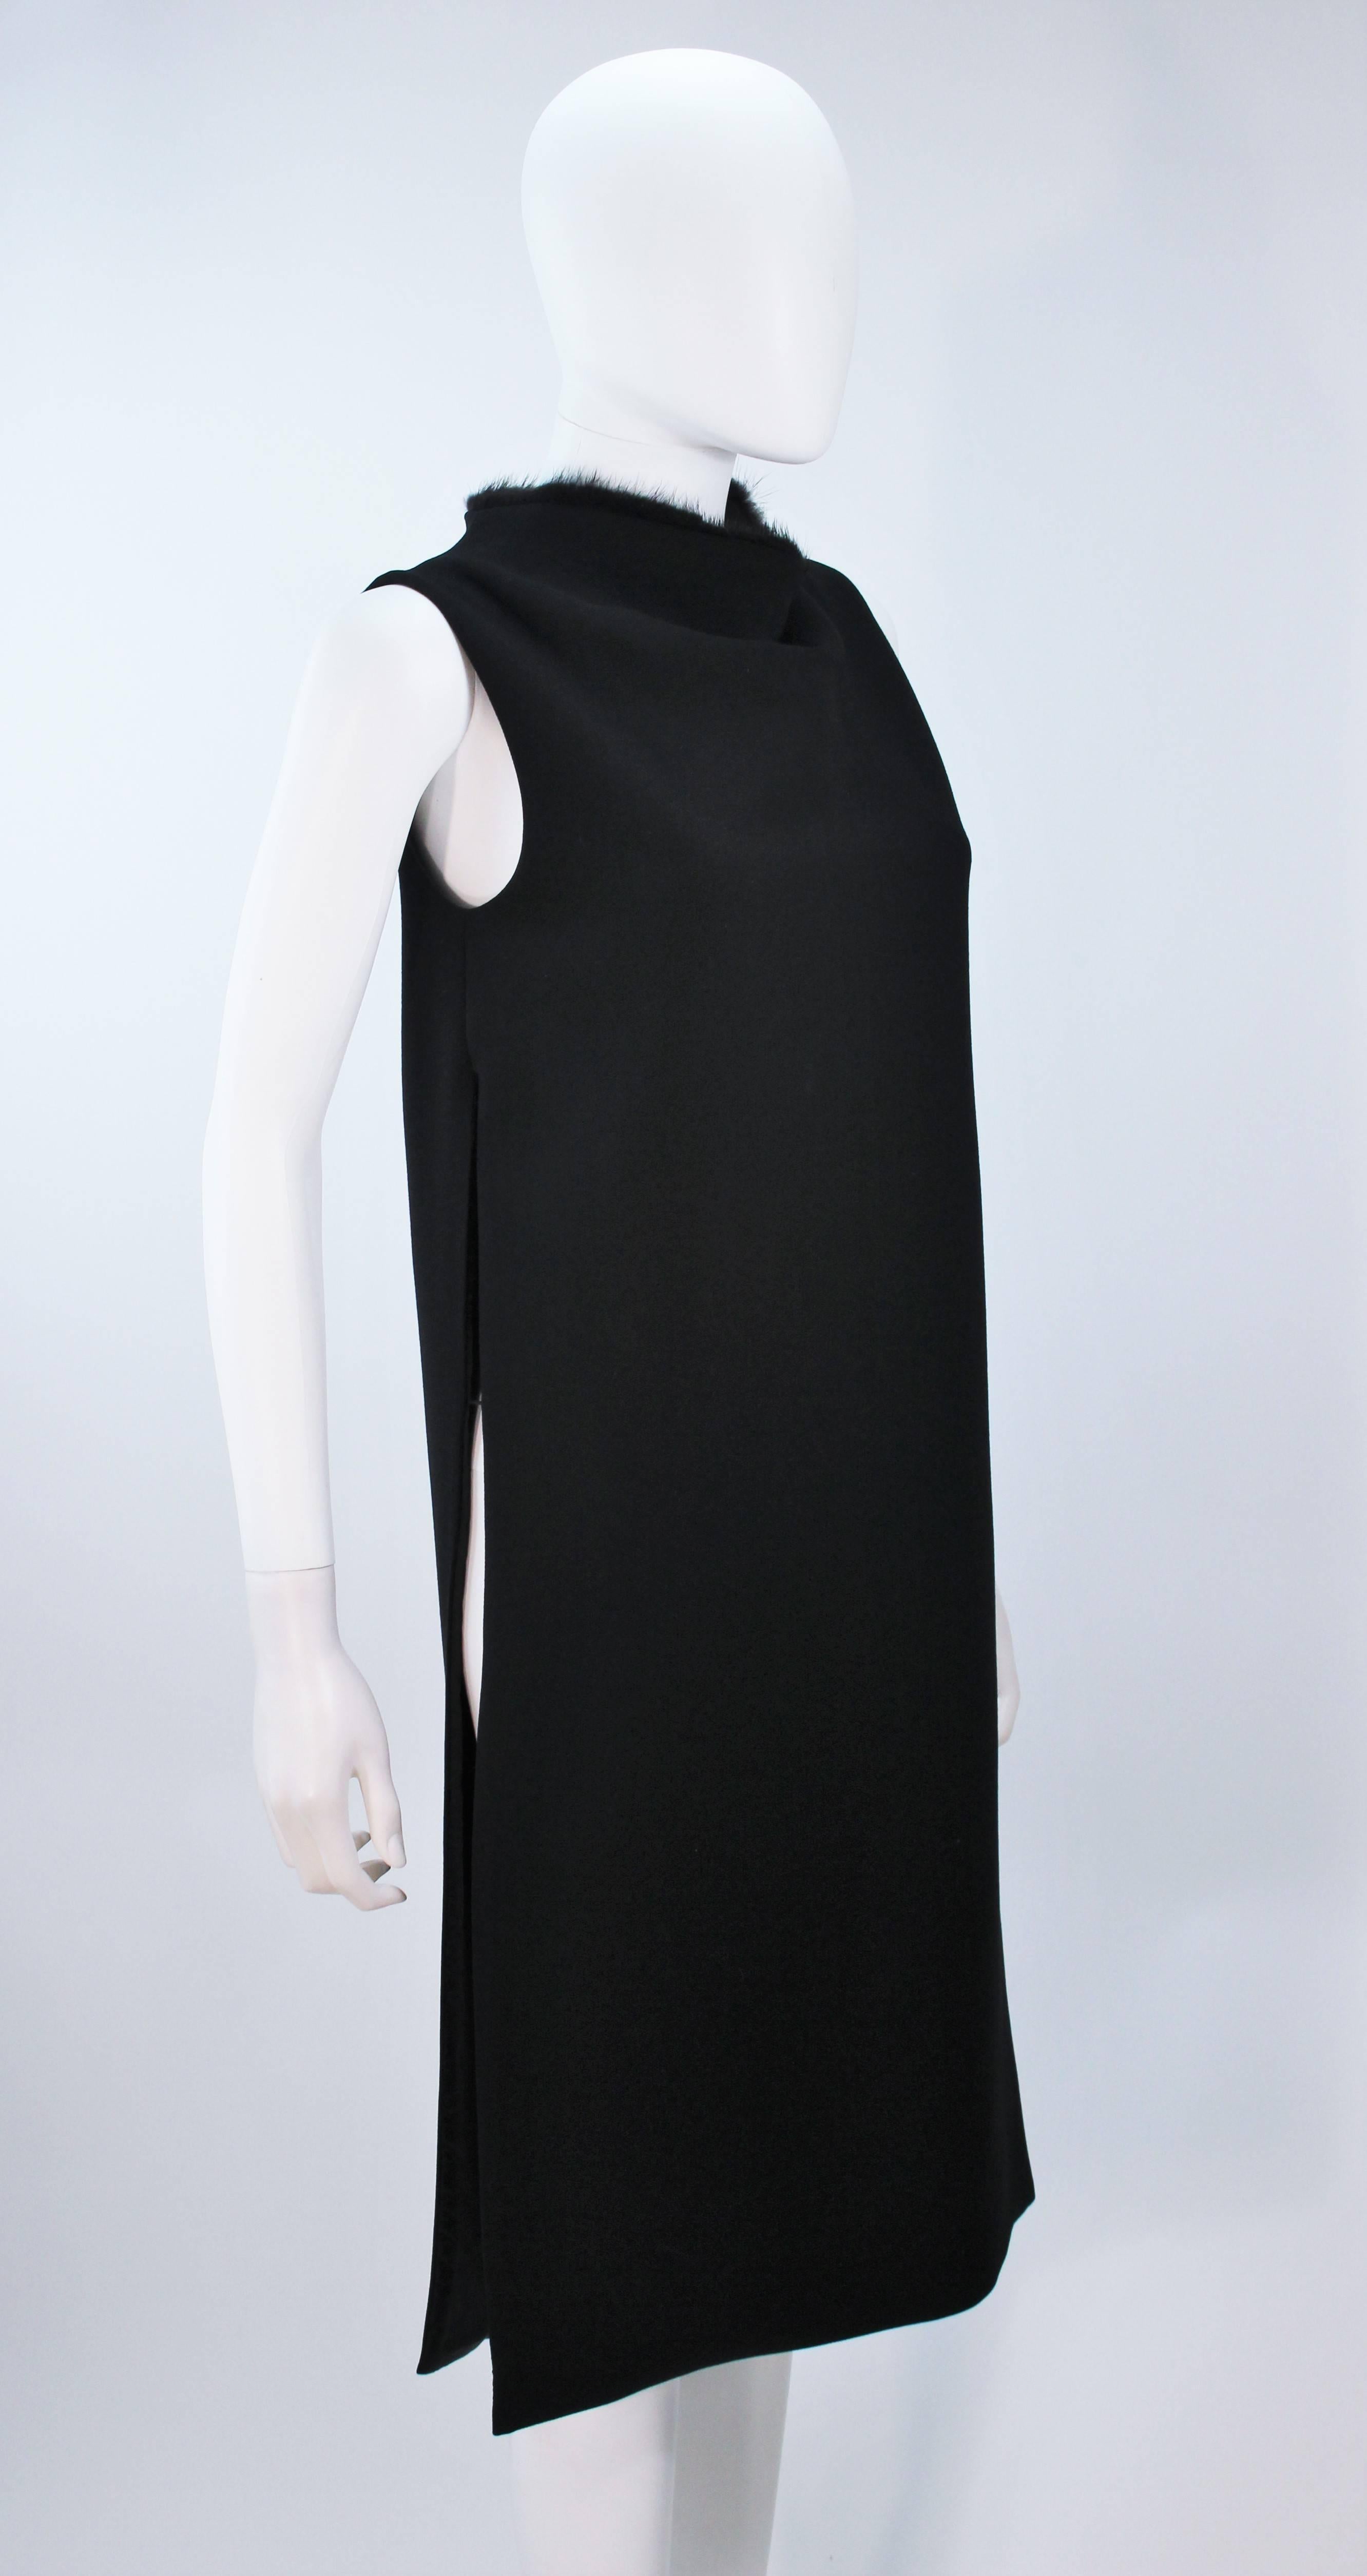 GIANNI VERSACE Black Wool Tunic Dress with Mink Collar and Open Sides Size 4-6 2